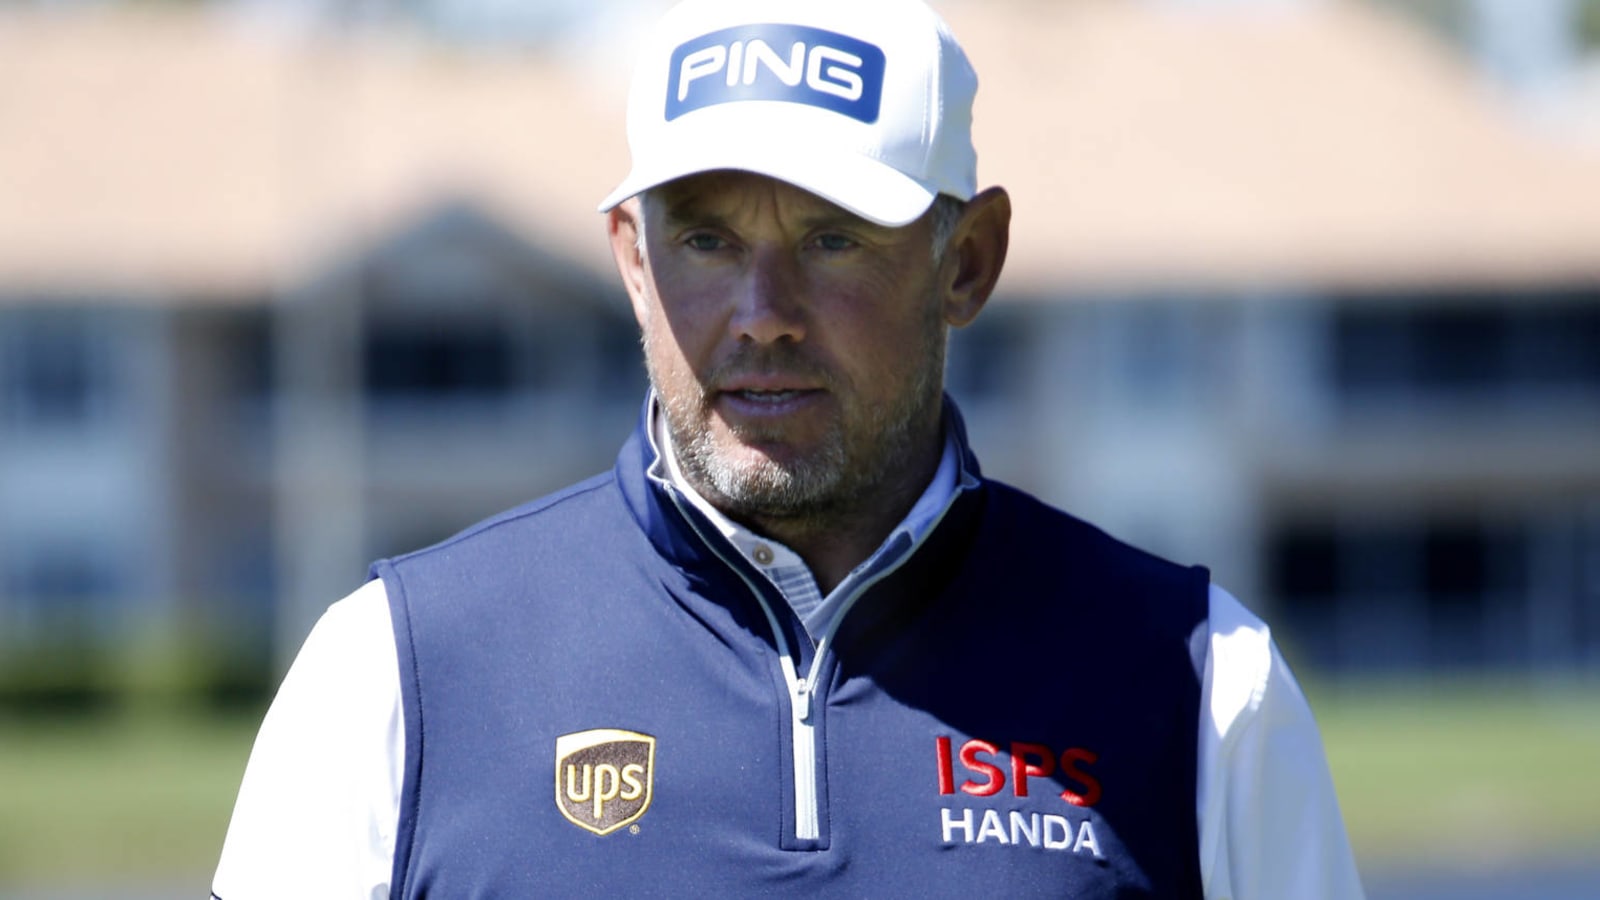 Lee Westwood: Playing in PGA Tour events 'not worth it' due to mandatory quarantines